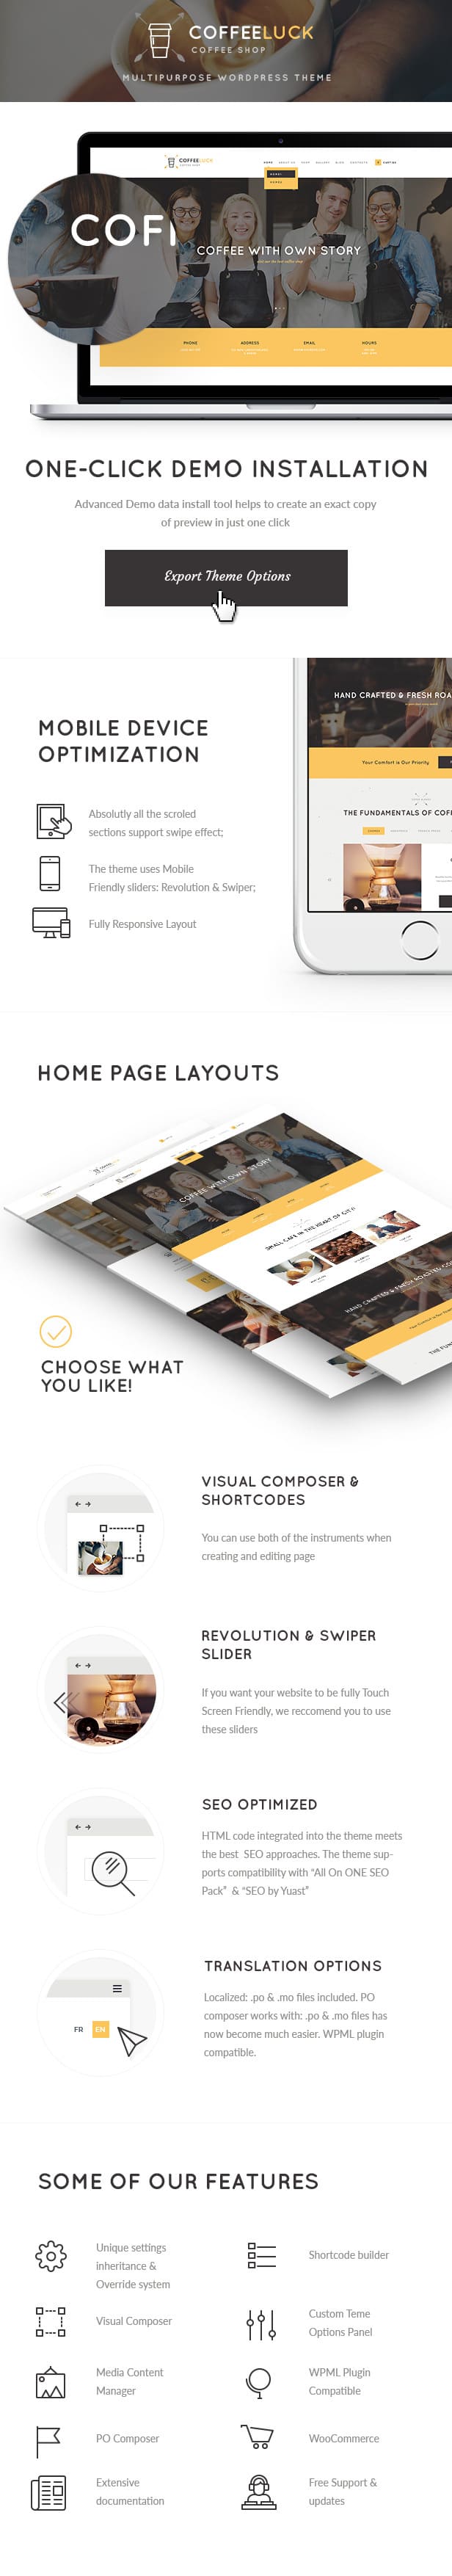 Mobile device optimization of the Coffee Luck | Cafe, Restaurant & Shop WordPress Theme.